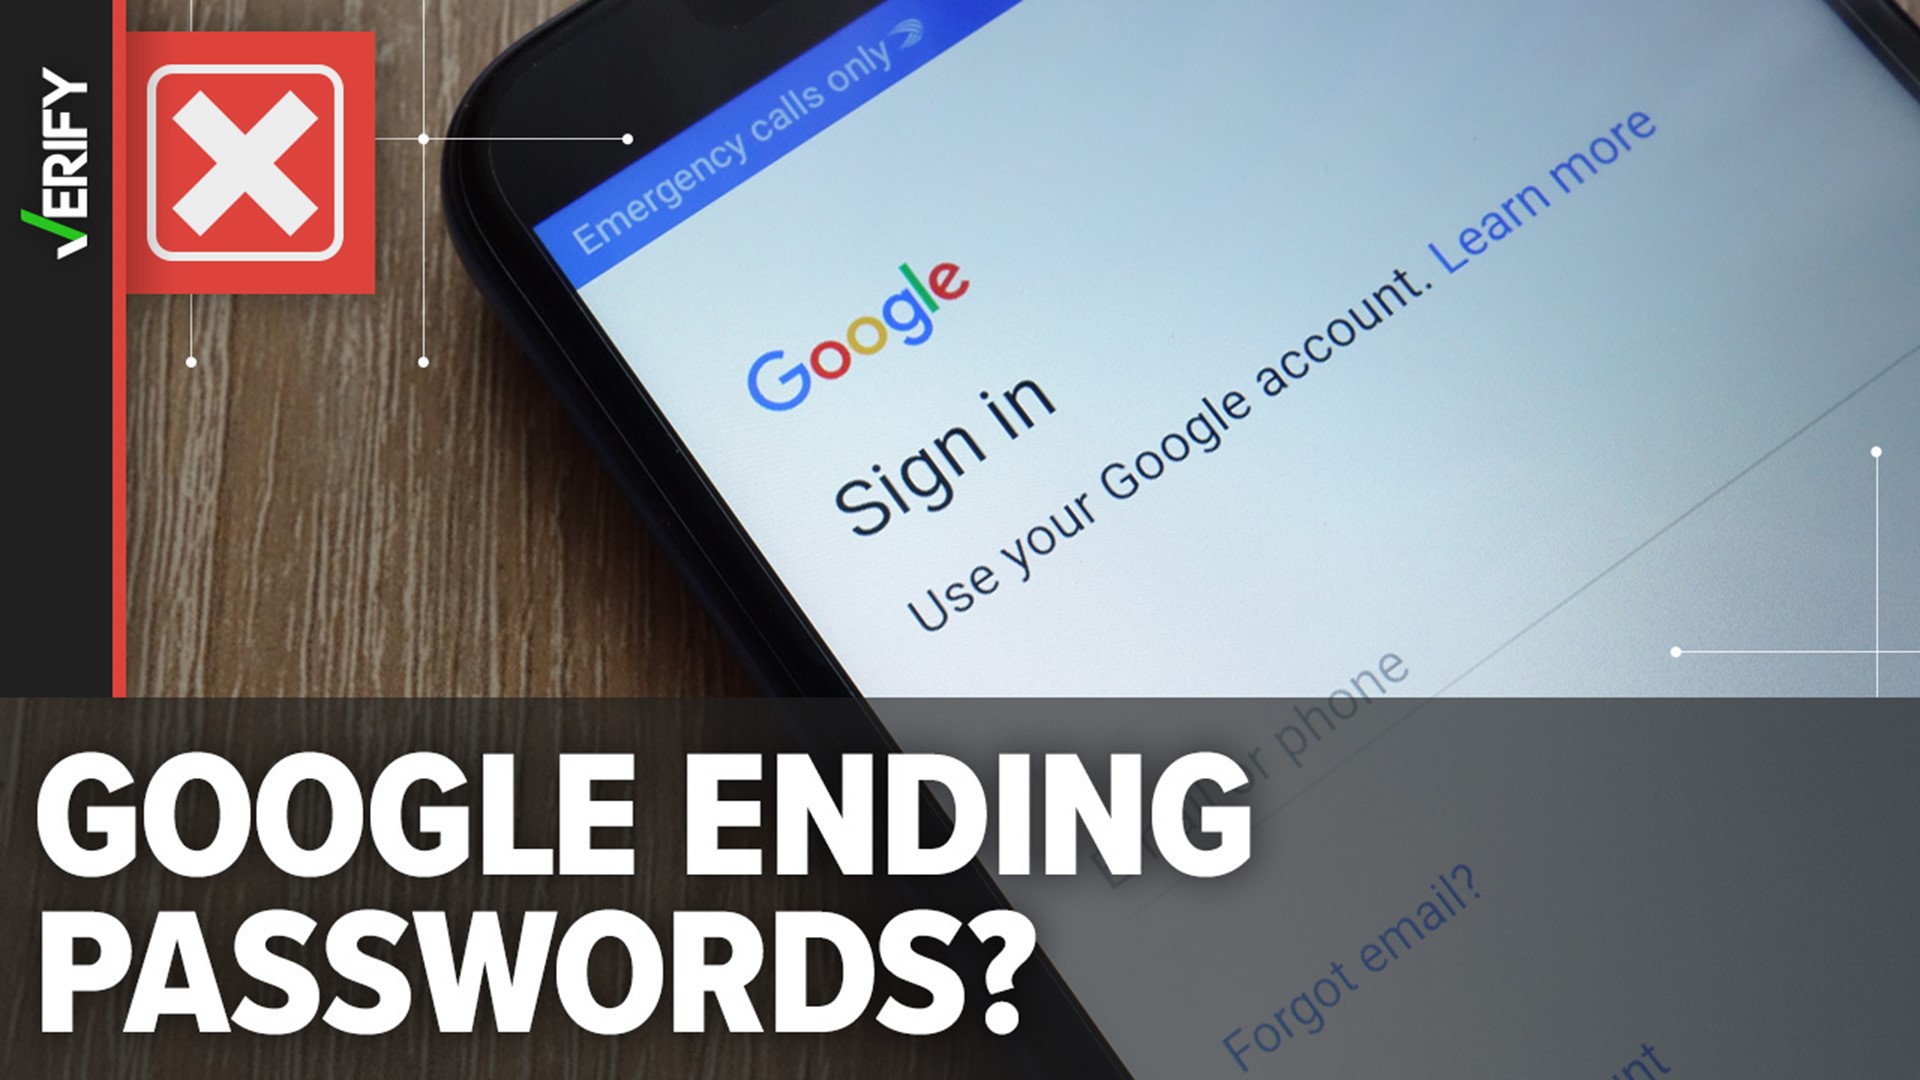 Google is now offering passkeys as an optional alternative to passwords. A spokesperson said there is no timeline for when passwords will be officially phased out.